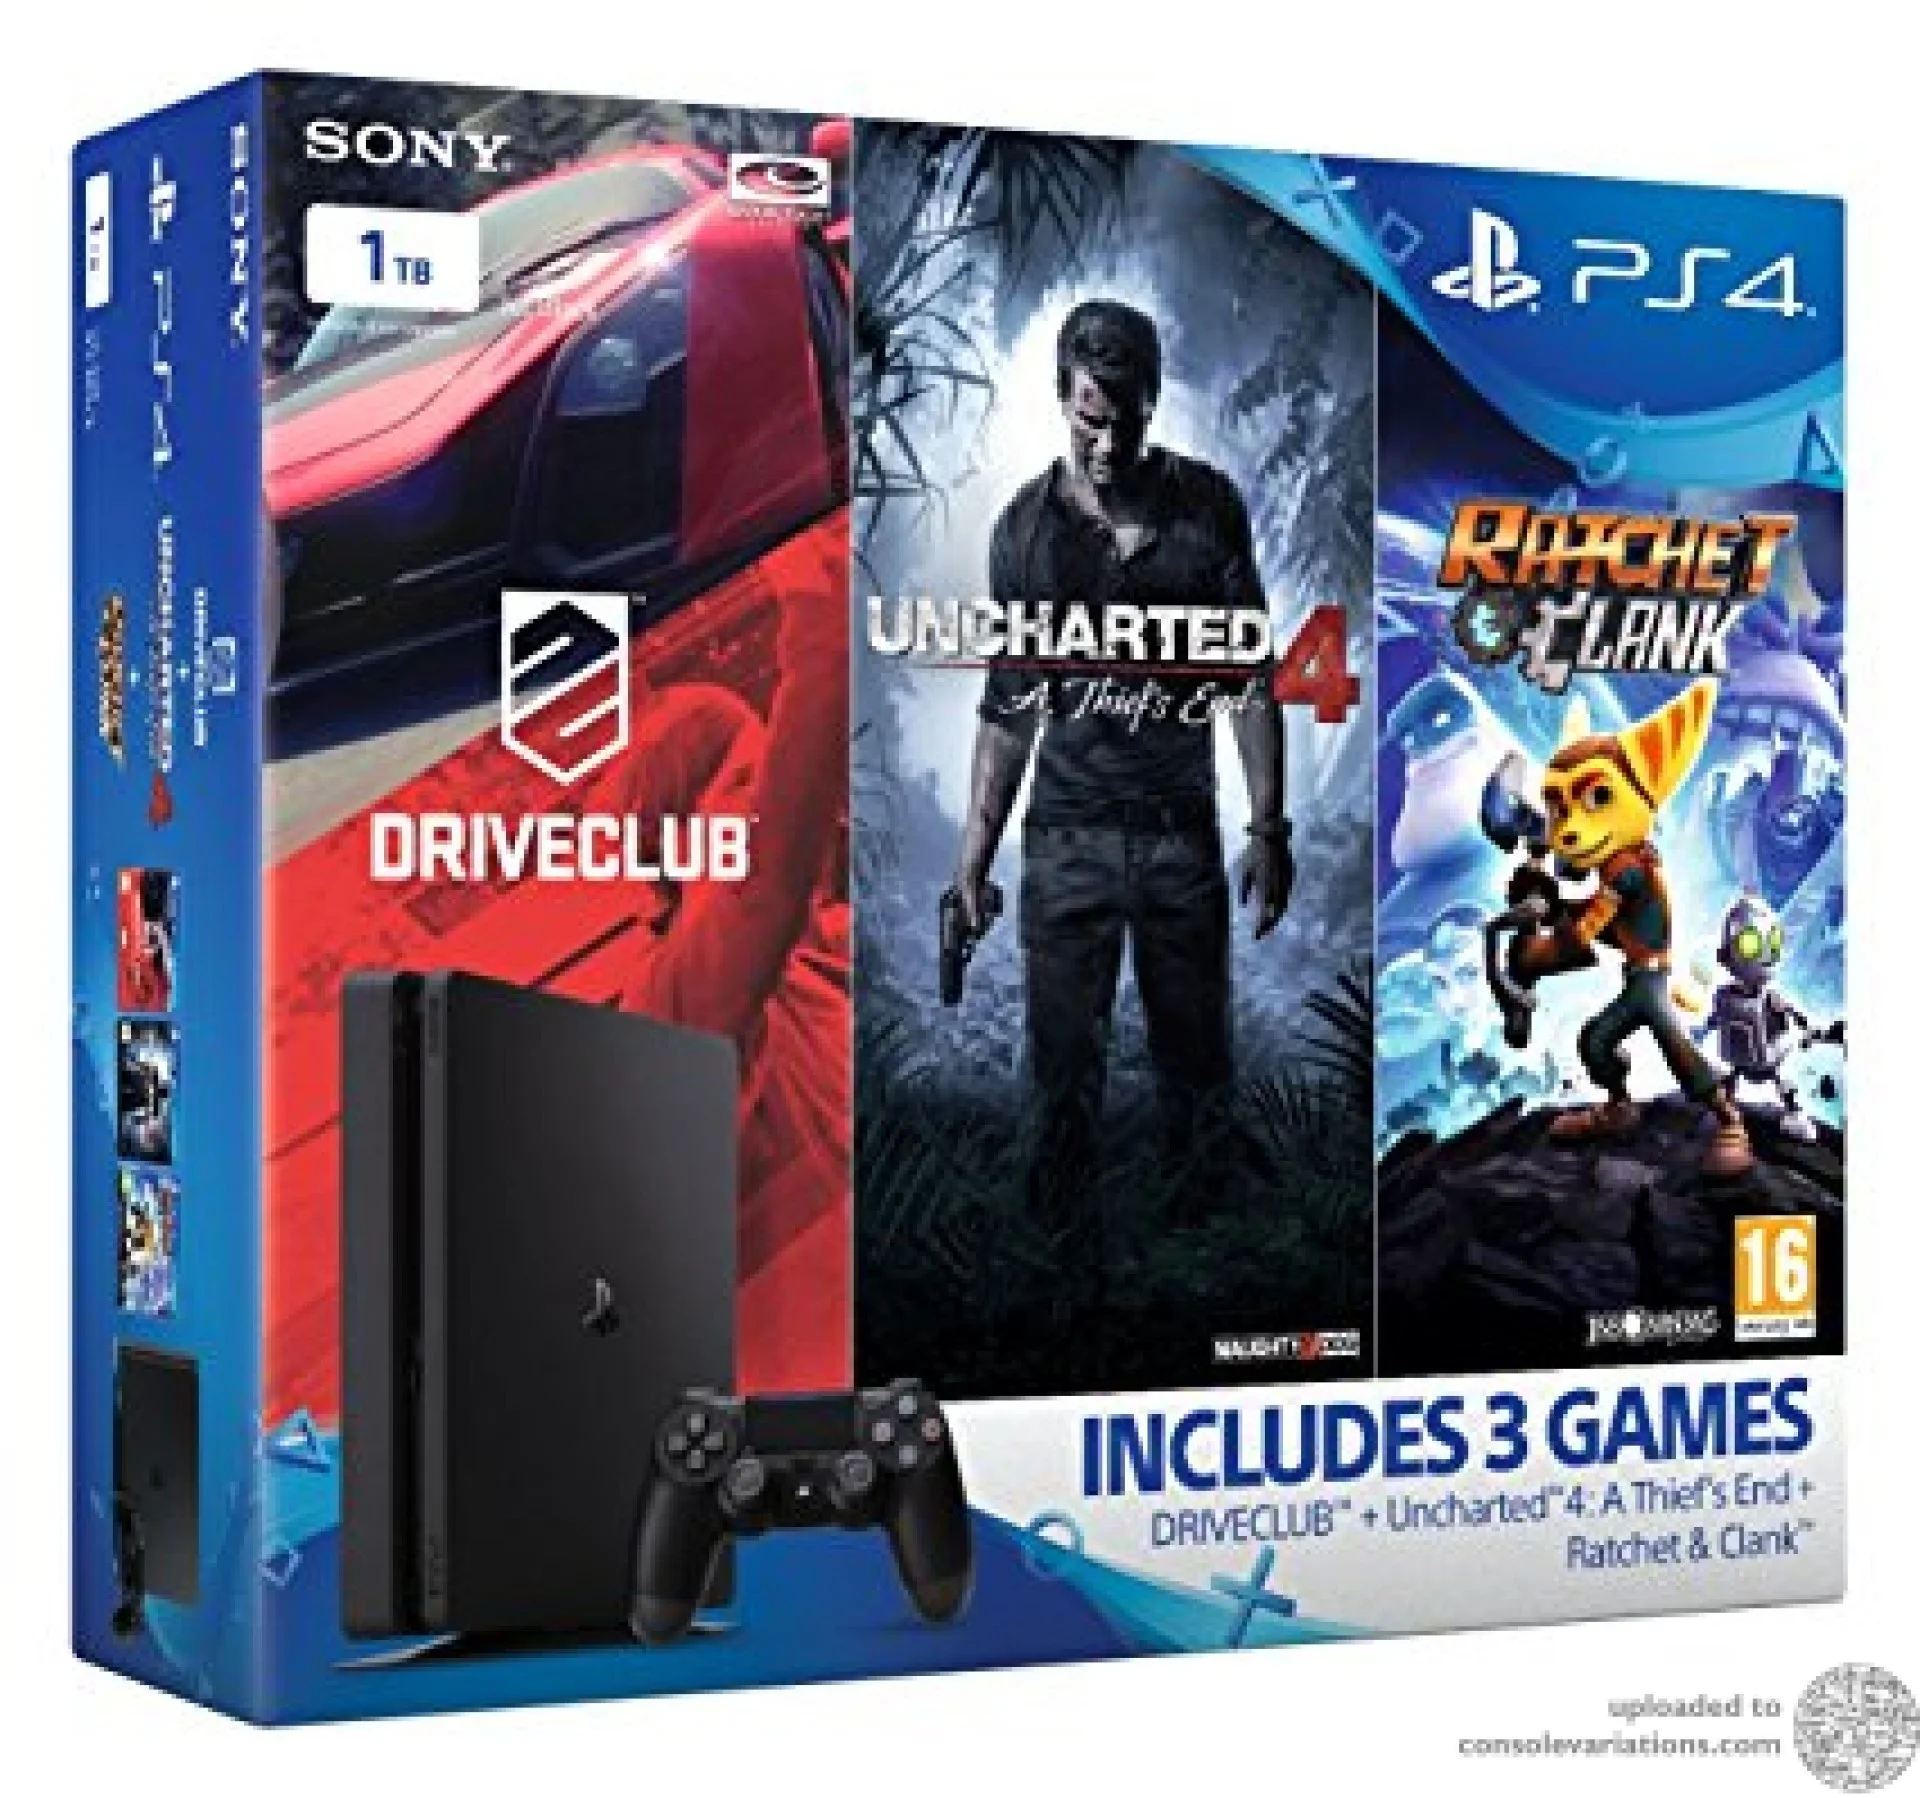  Sony PlayStation 4 Slim Driveclub + Uncharted 4 + Ratchet &amp; Clank Bundle